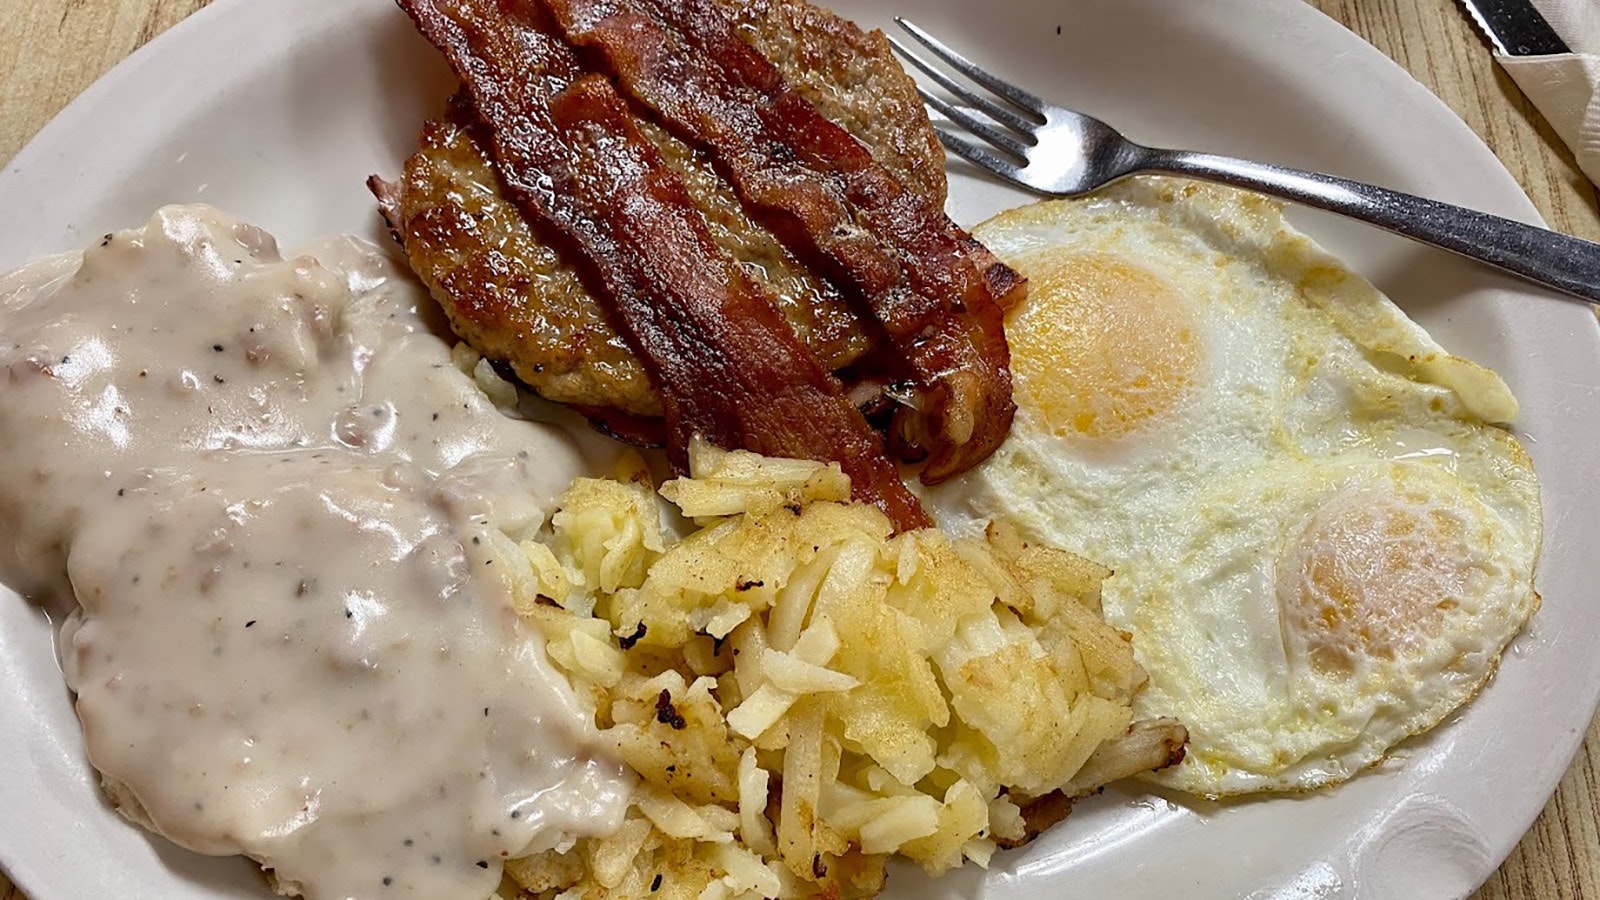 There's nothing like a classic diner breakfast, which is the specialty at G-Ma's Diner in Mills, Wyoming.